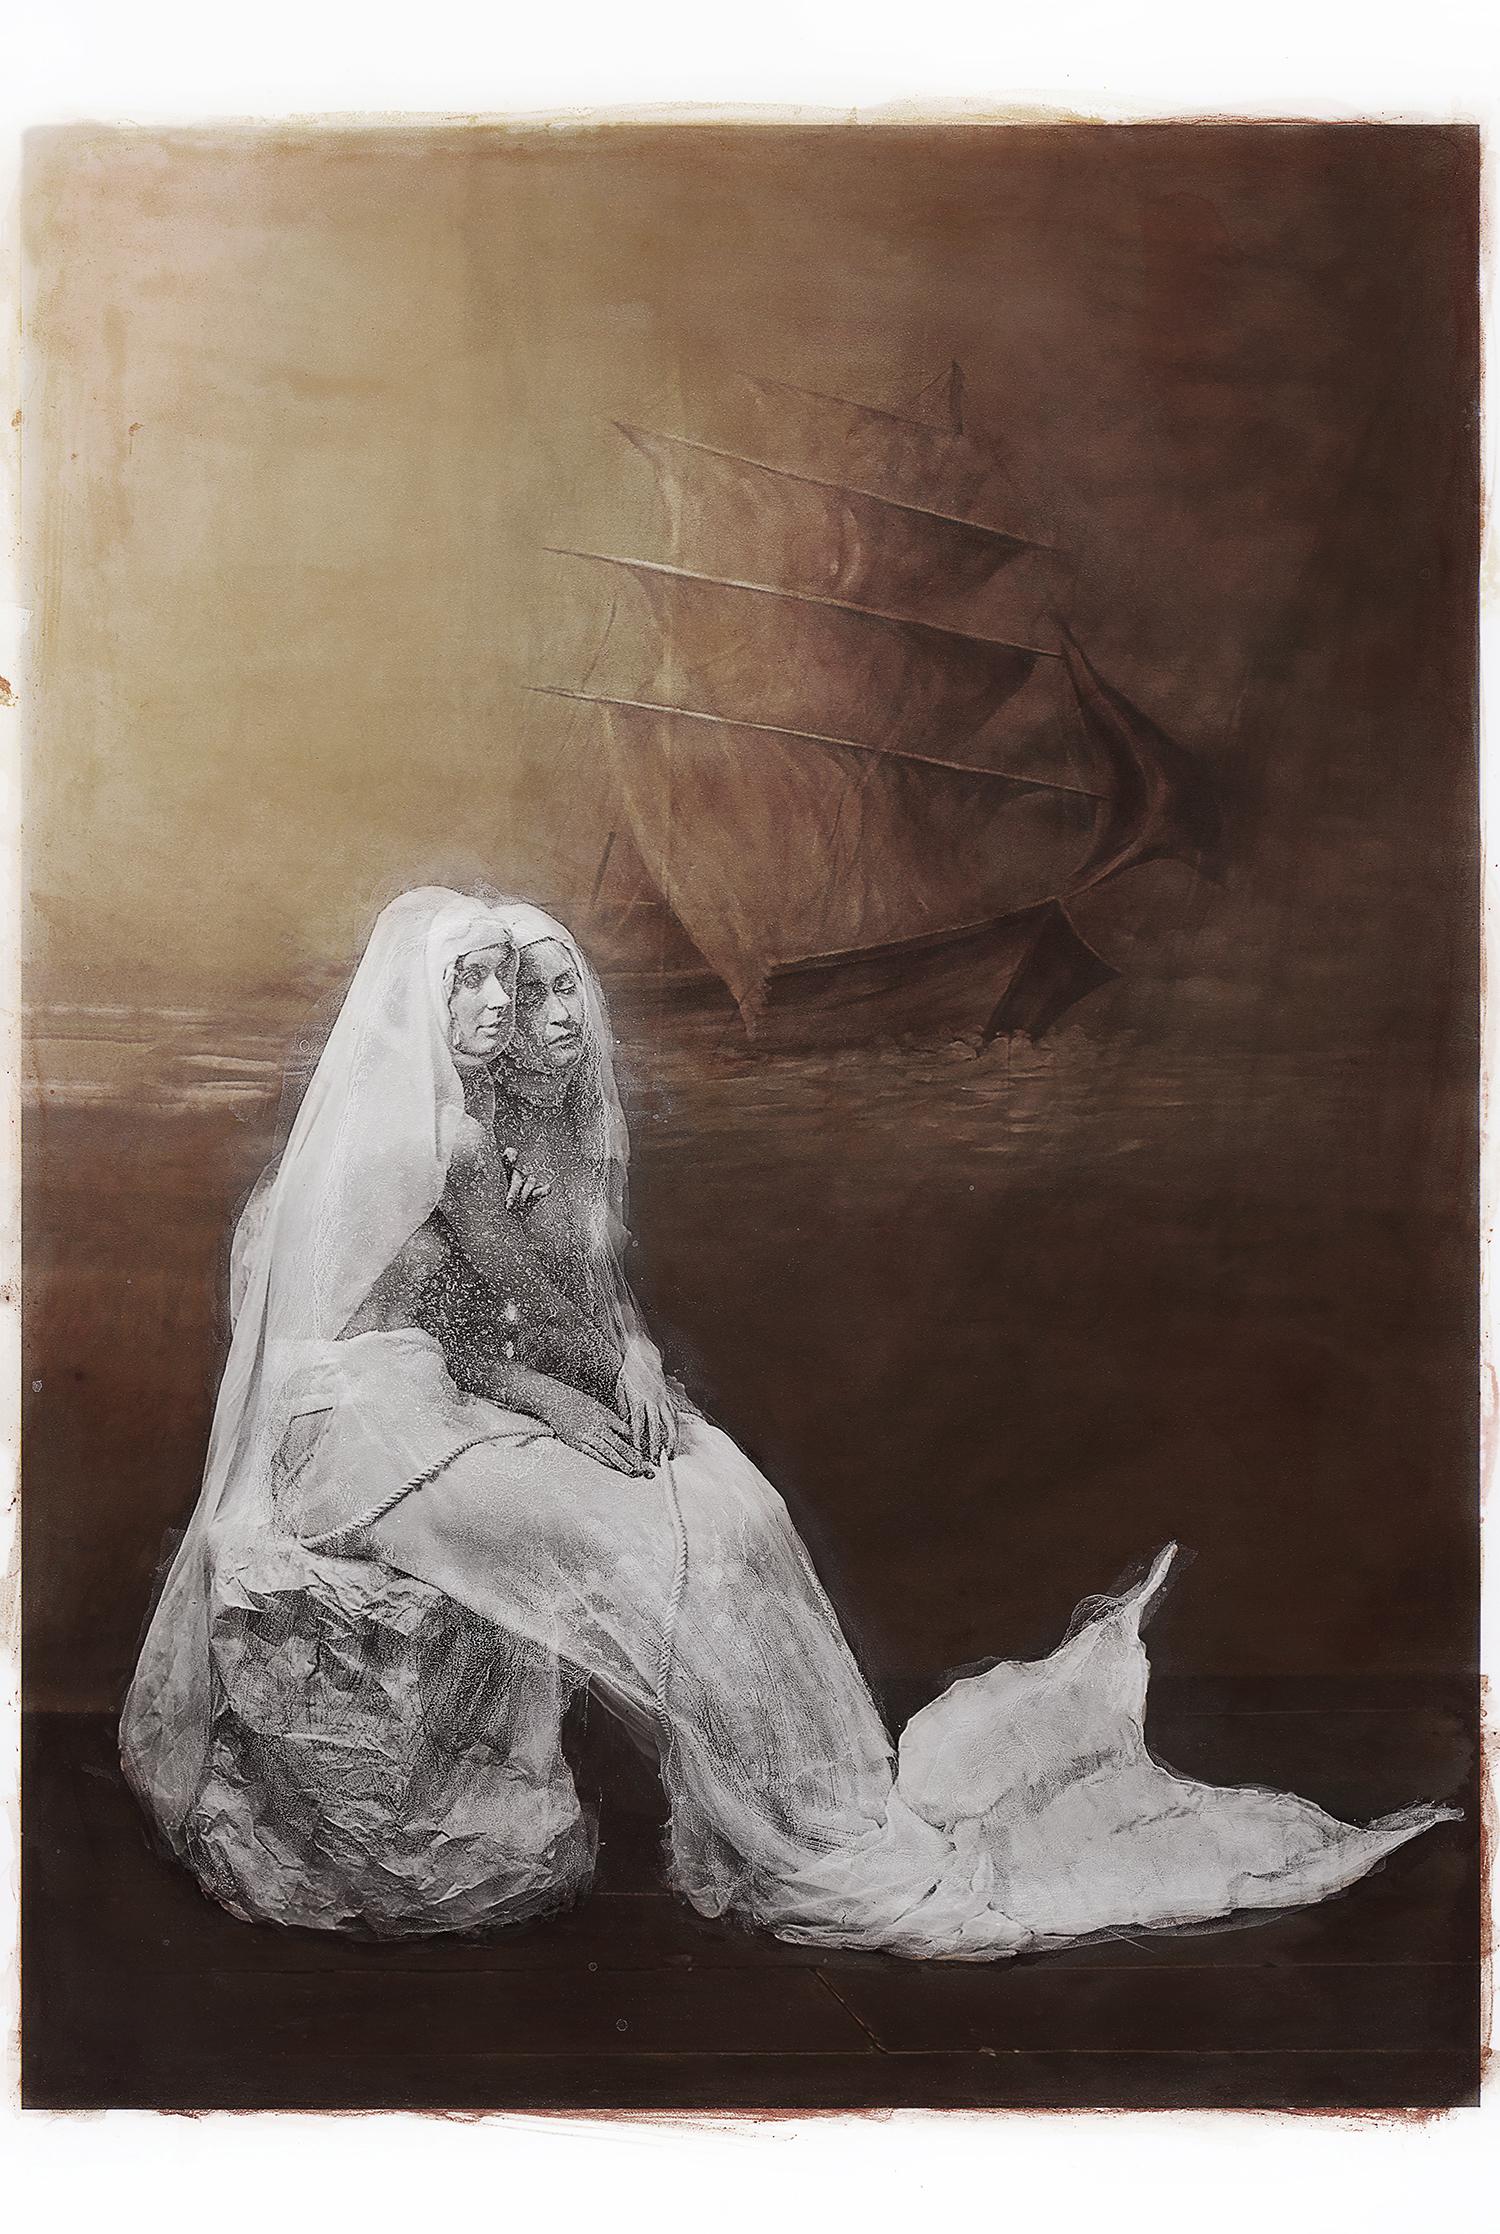 Katie Eleanor Color Photograph - Siren immobilised in marble locked in embrace and galleon ship in the background